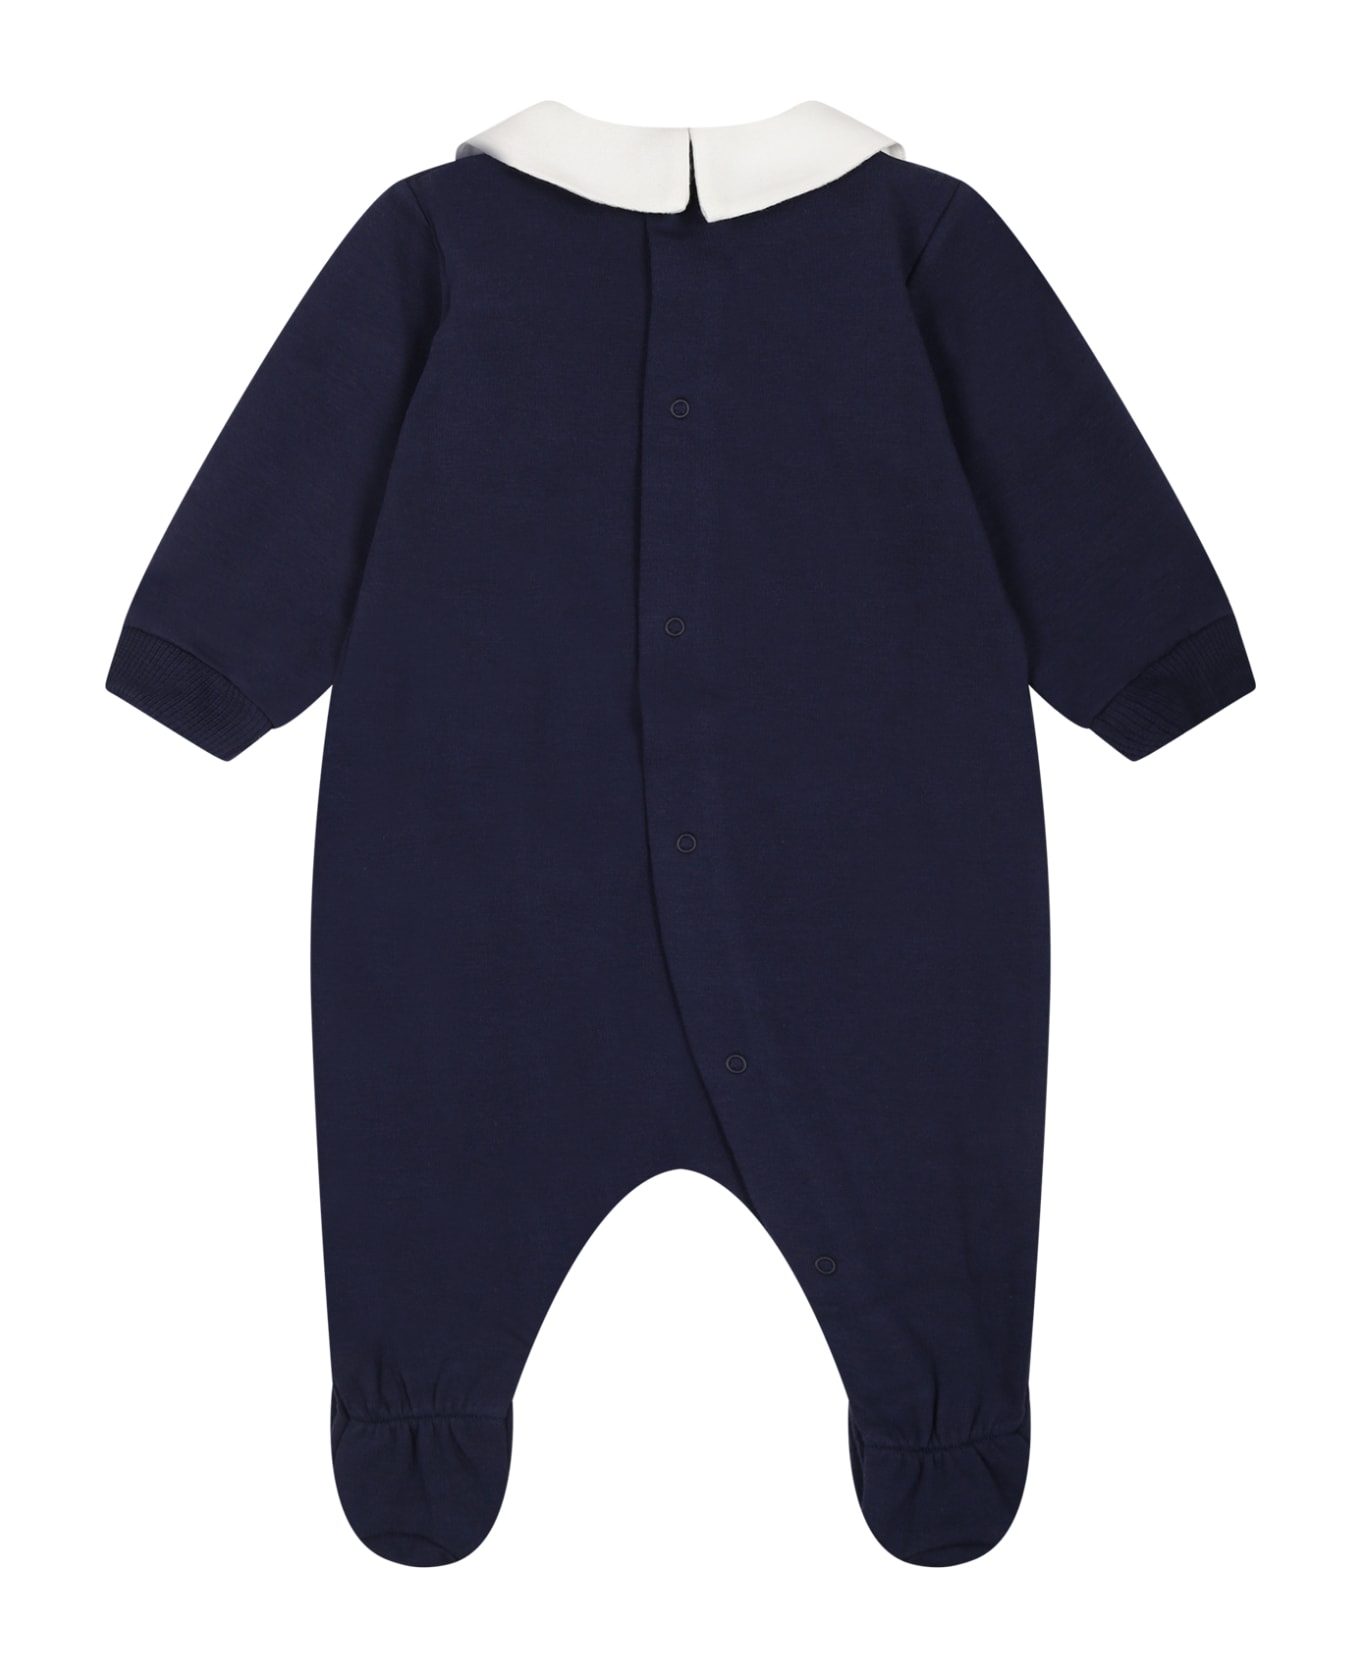 Moschino Blue Babygrow For Baby Kids With Teddy Bear - Blue